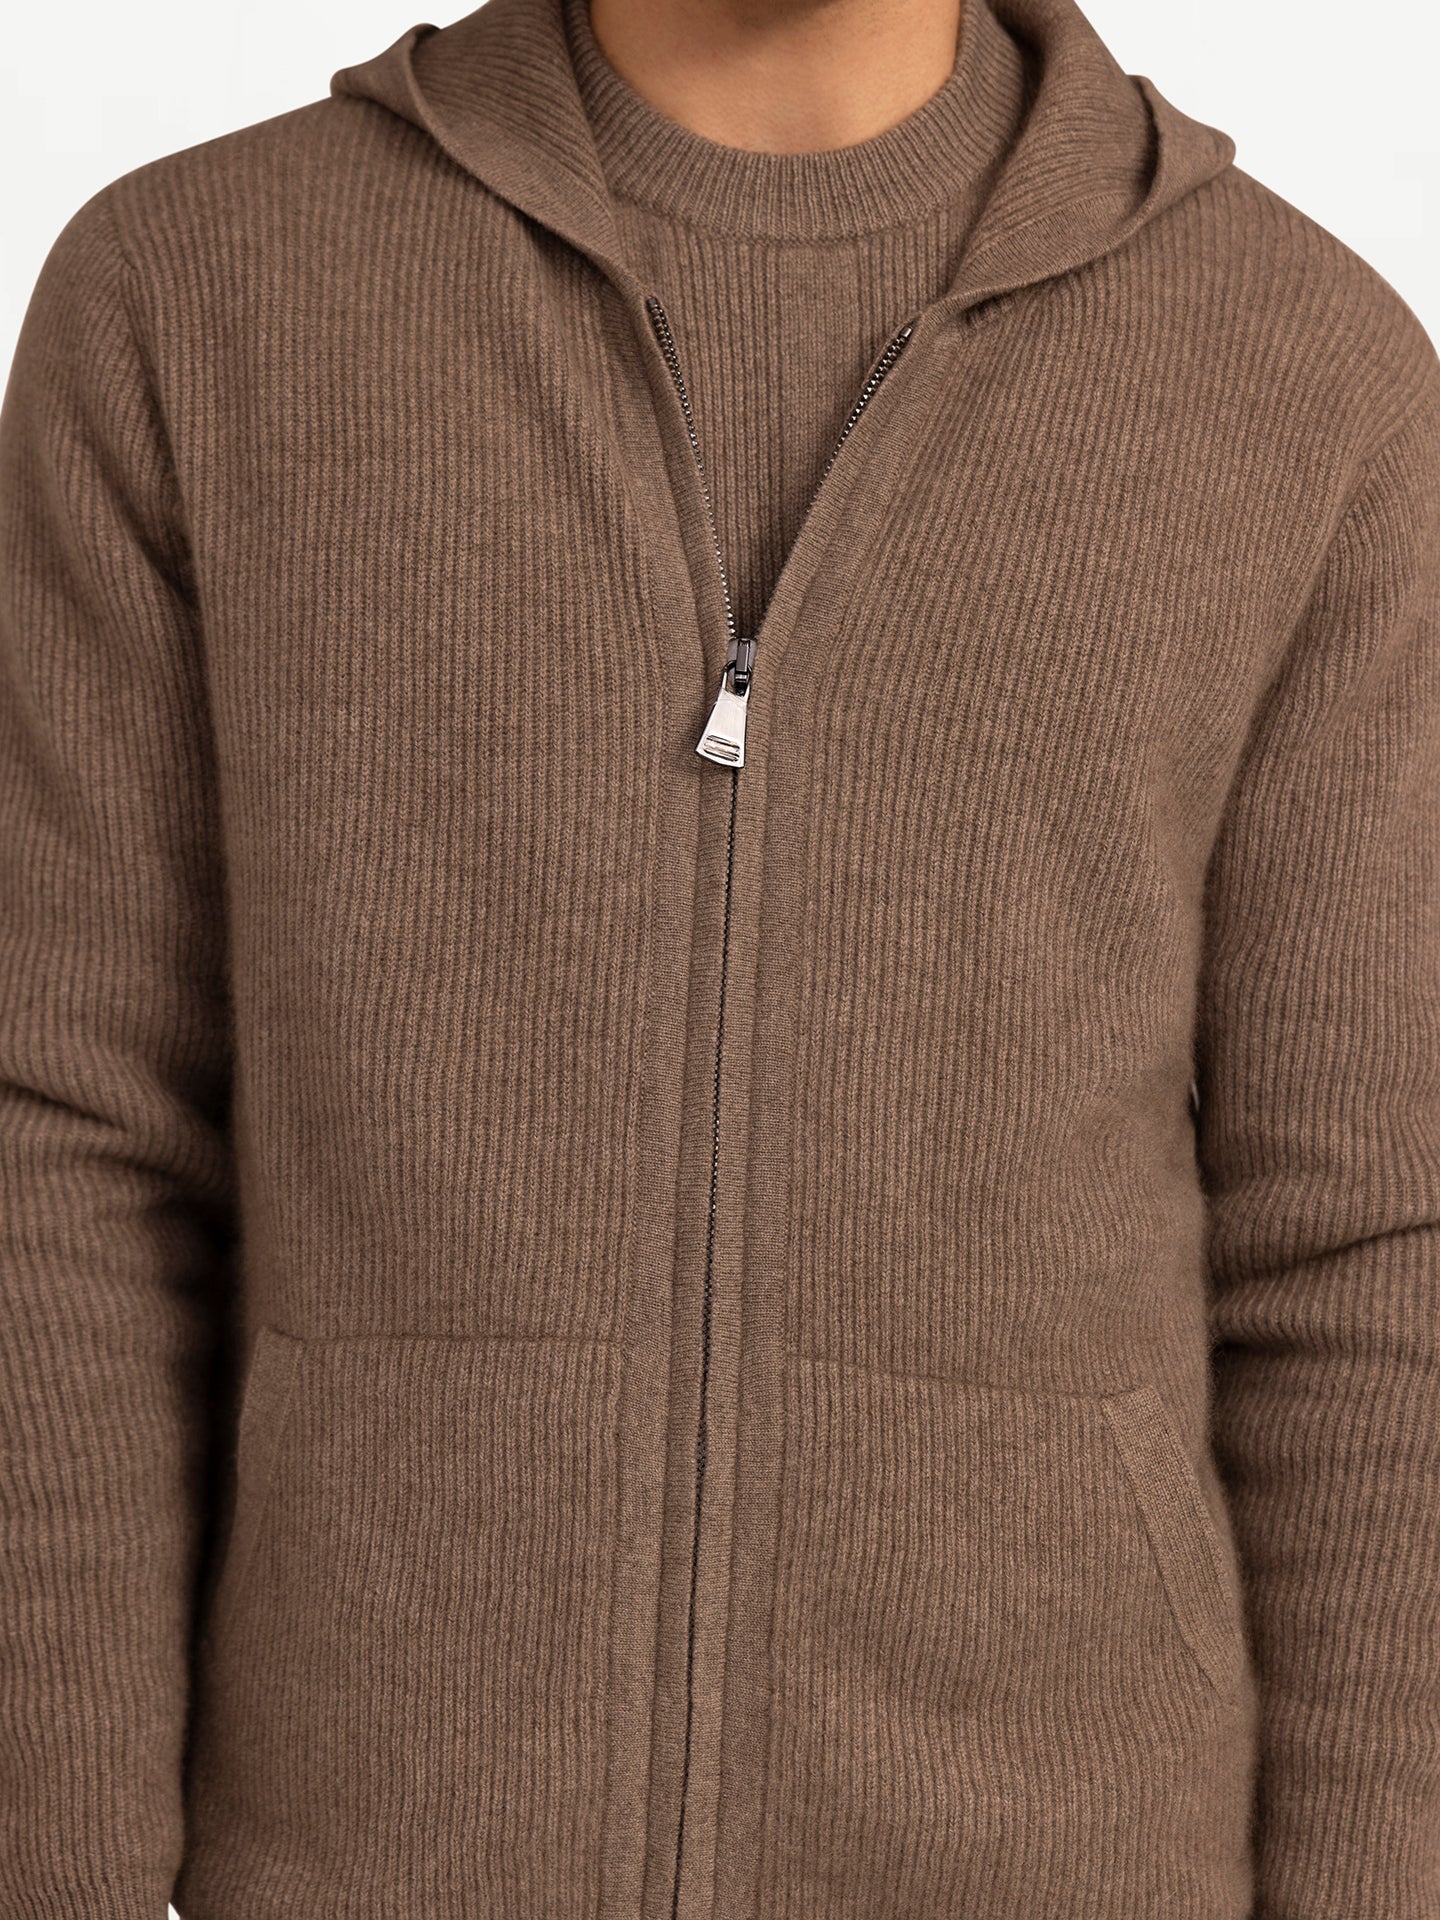 Men's Organic Cashmere Zip Hoodie with Pockets Taupe - Gobi Cashmere